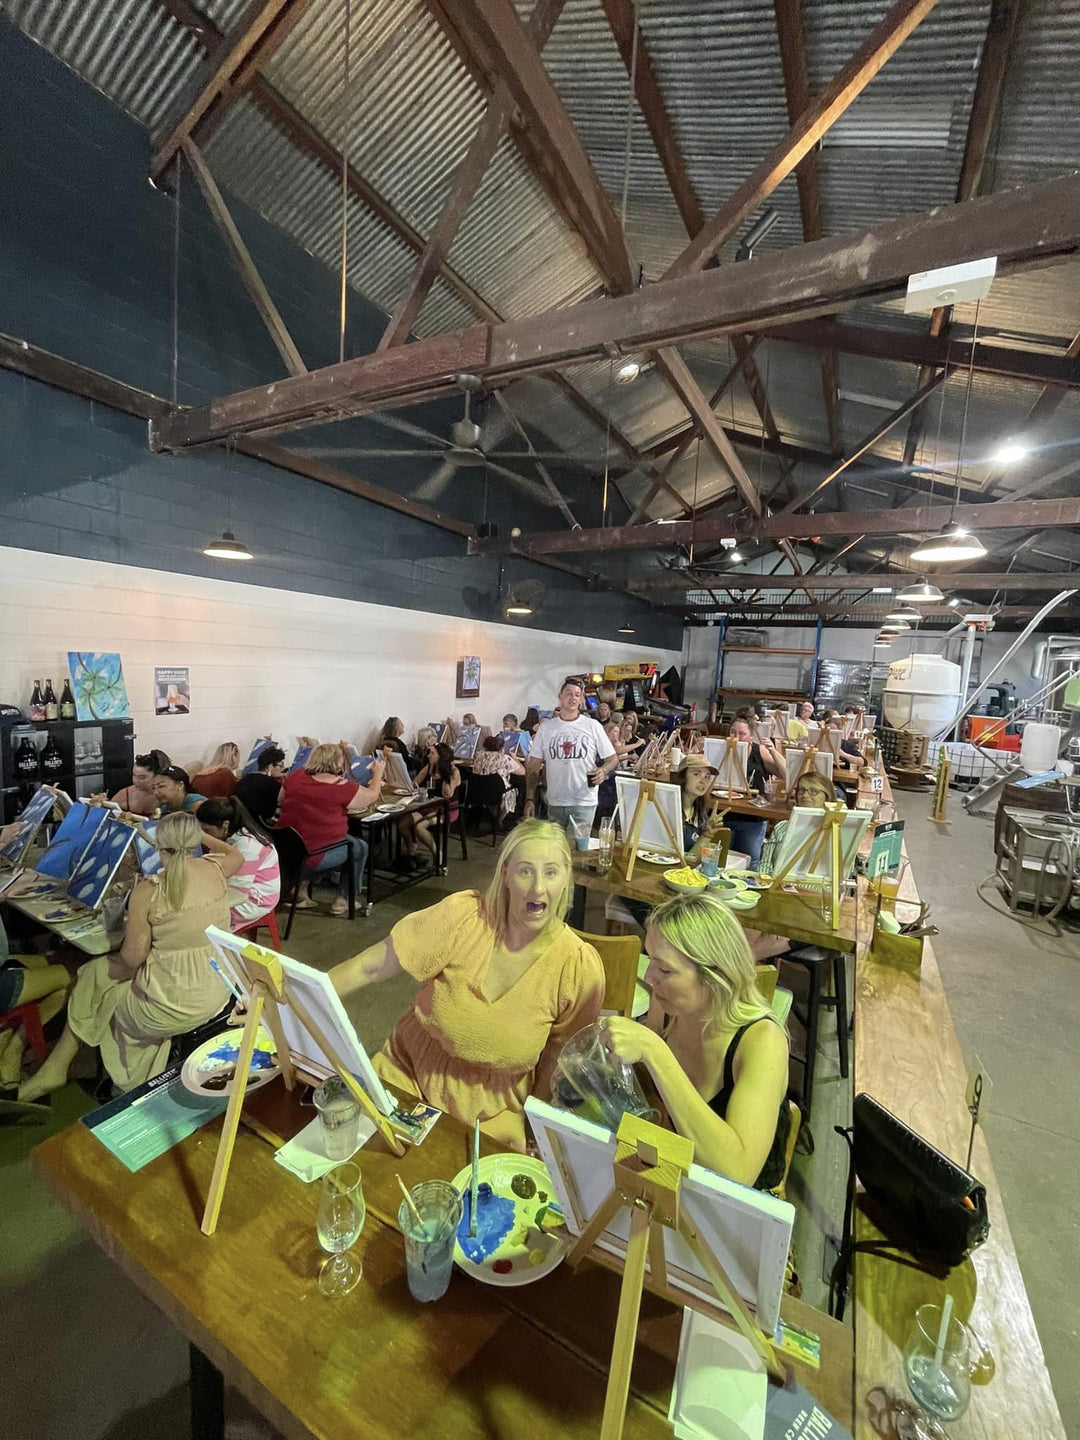 Bundaberg Paint and Sip Party-Paint Juicy - Paint and Sip